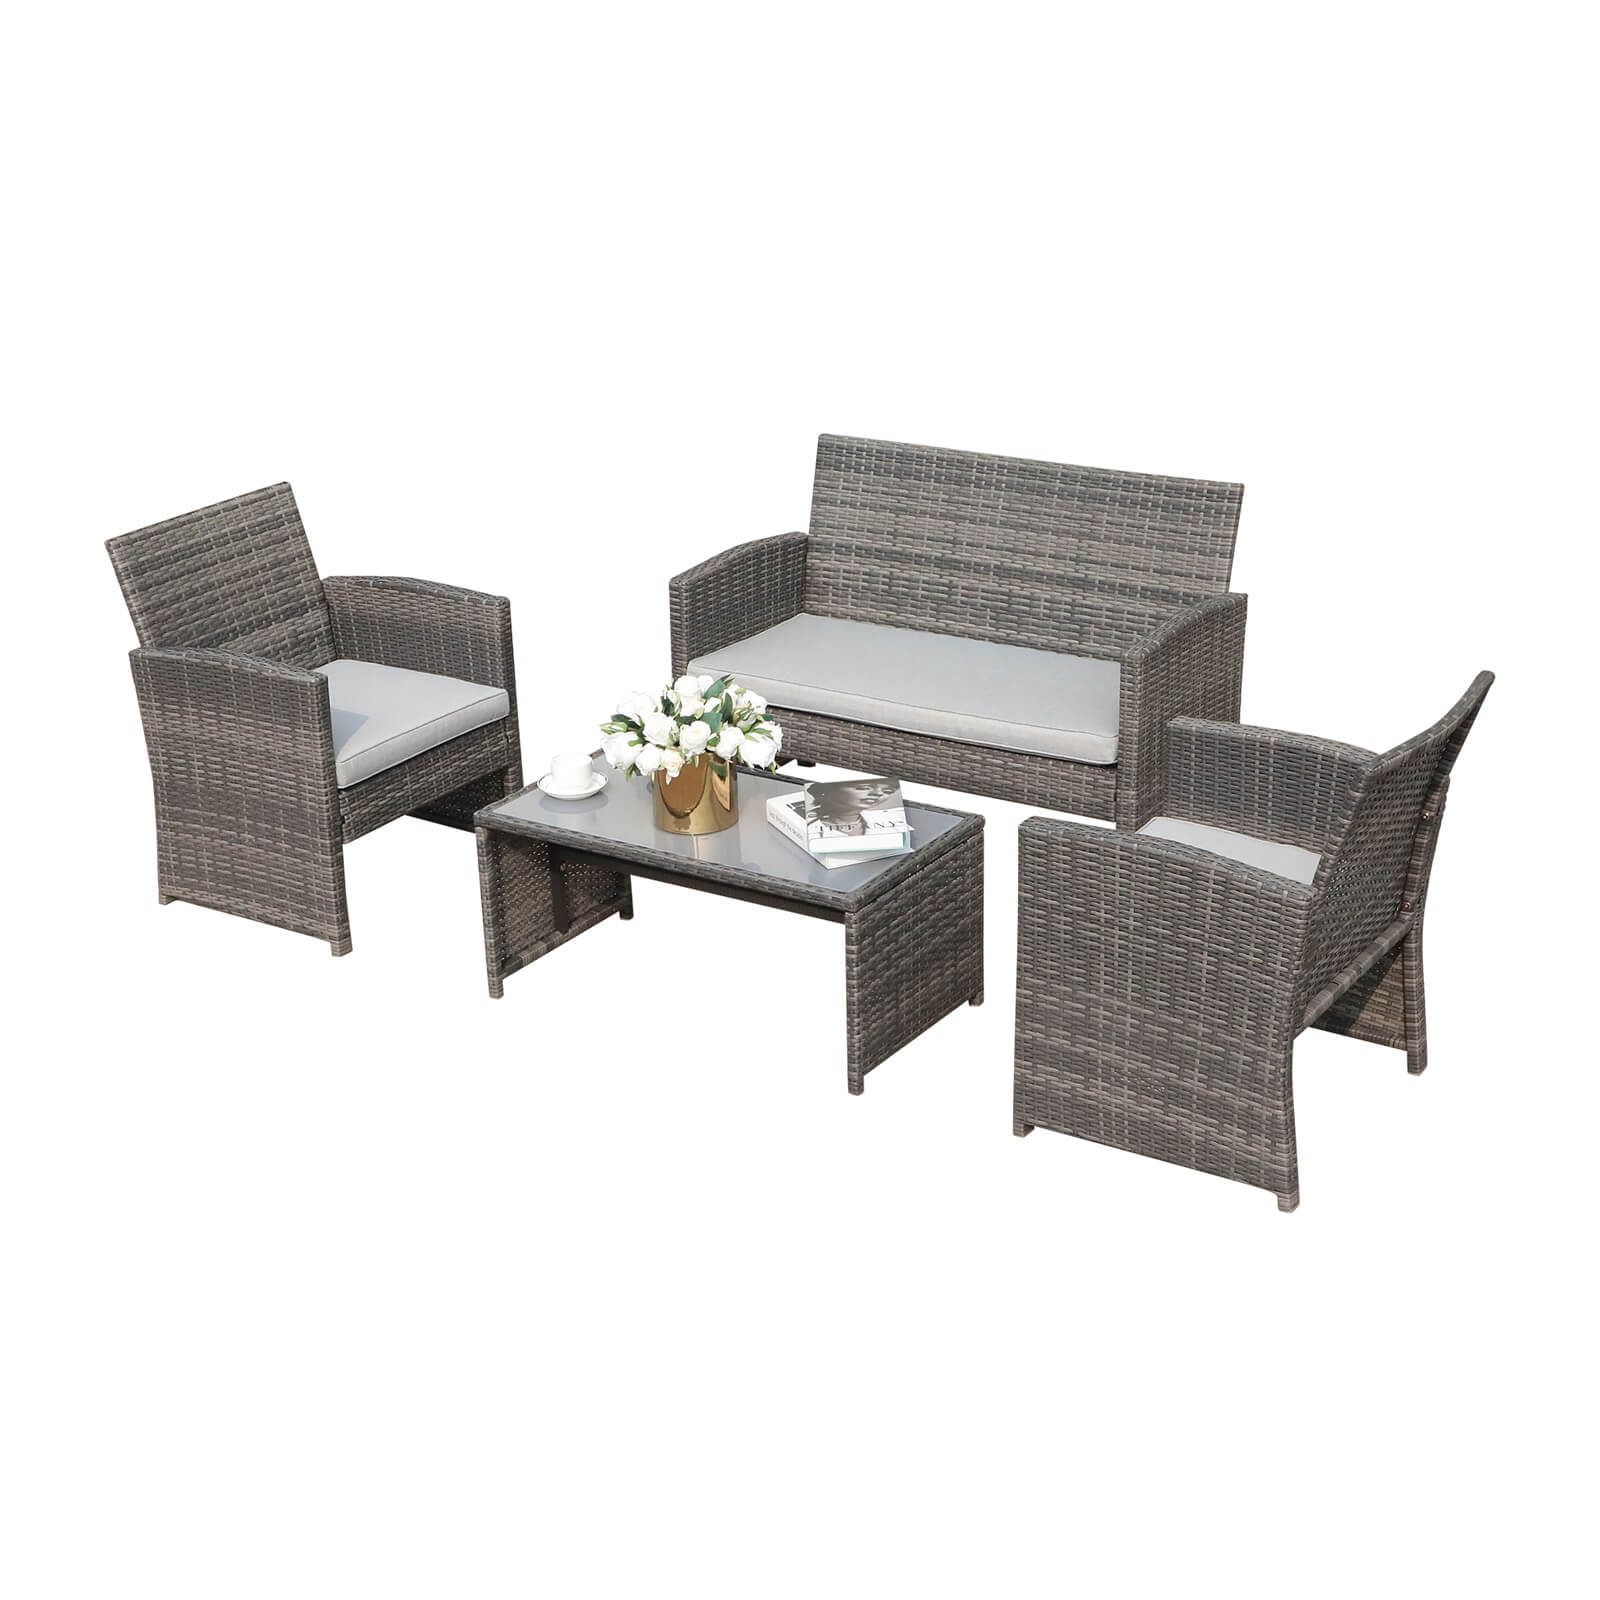 4pcs Outdoor Patio Conversation Set Wicker Furniture Sets For Small Spaces